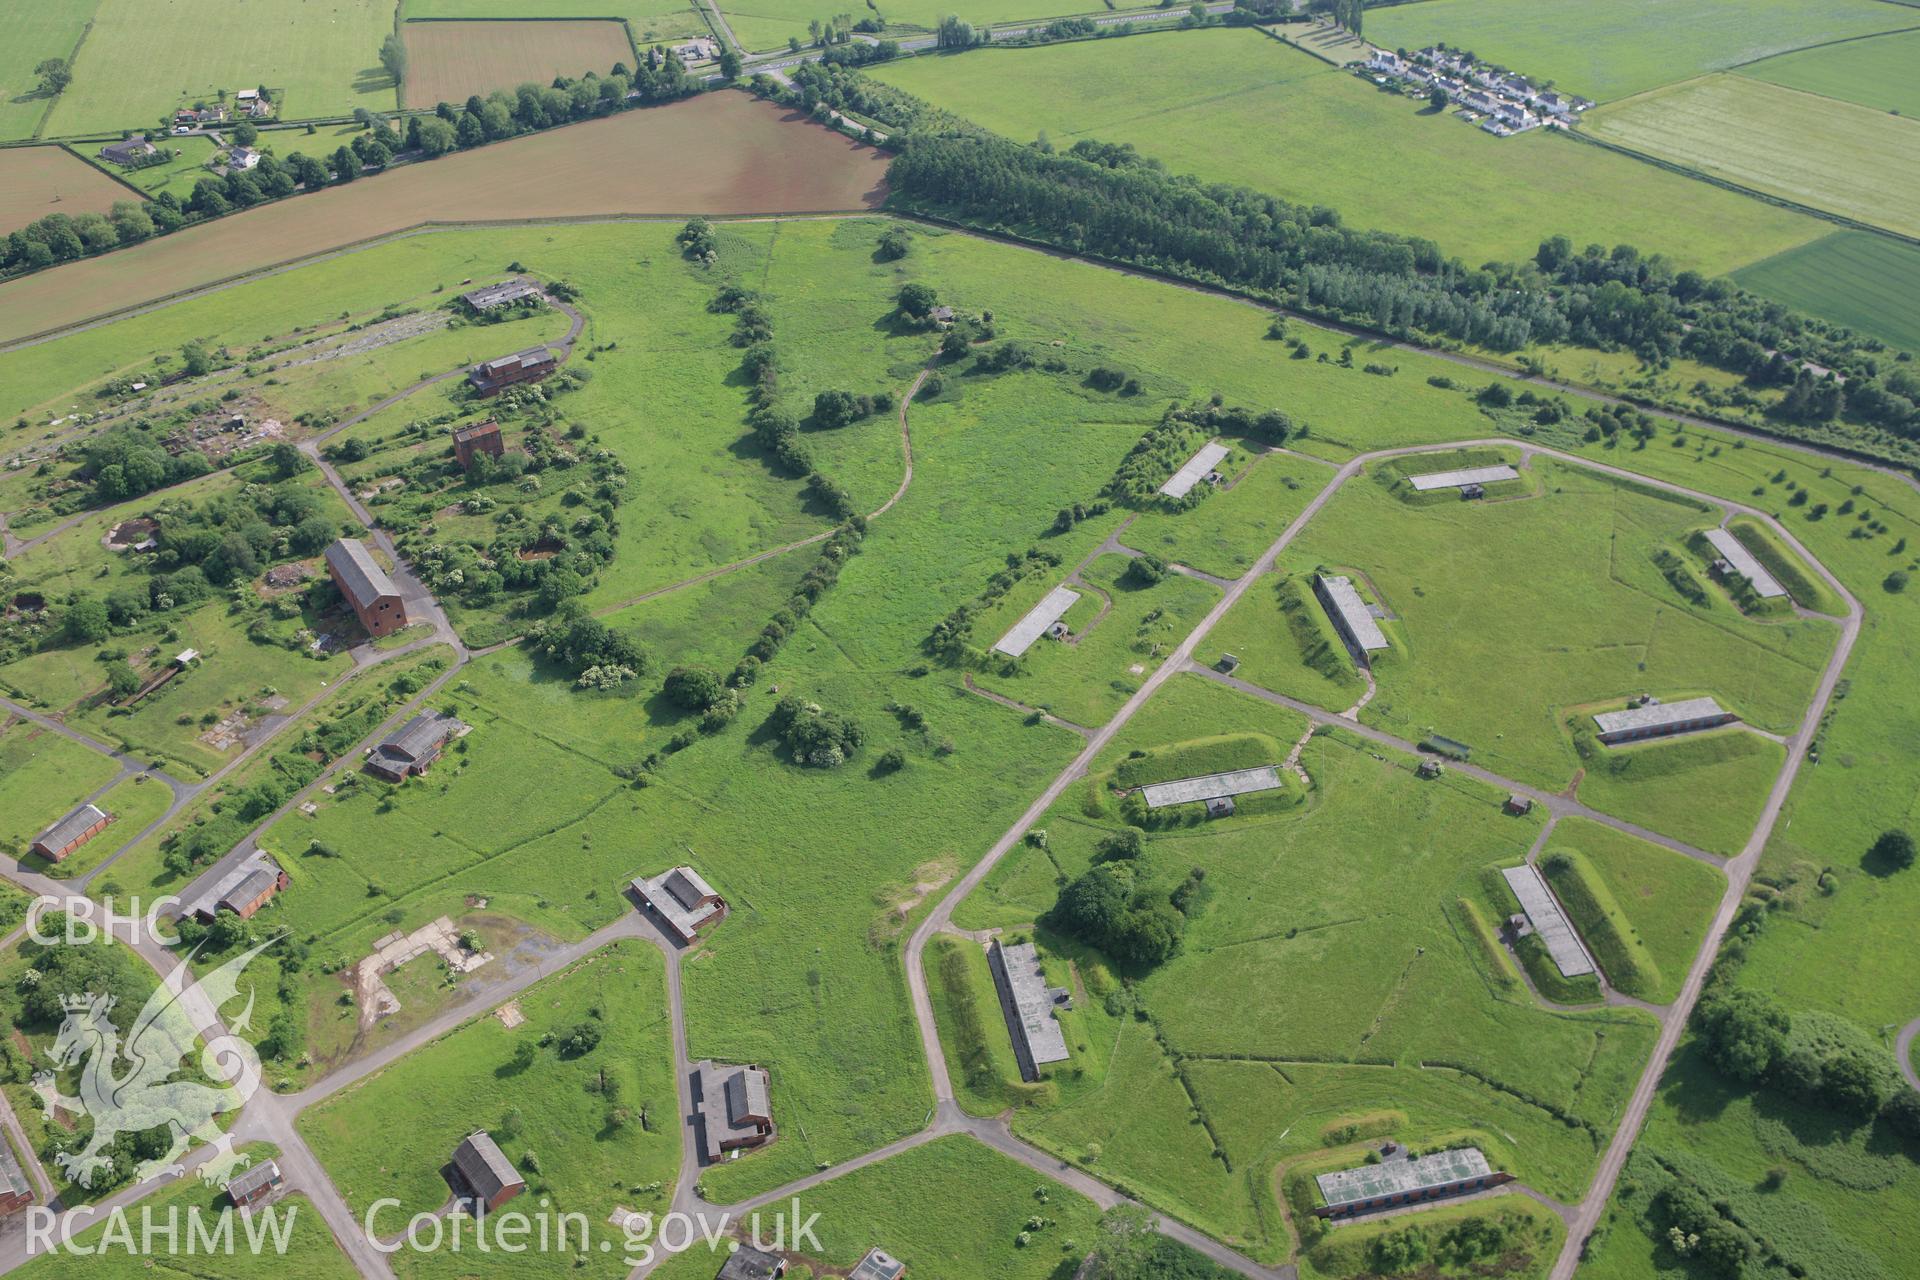 RCAHMW colour oblique aerial photograph of Caerwent Royal Naval Propellant Factory. Taken on 11 June 2009 by Toby Driver